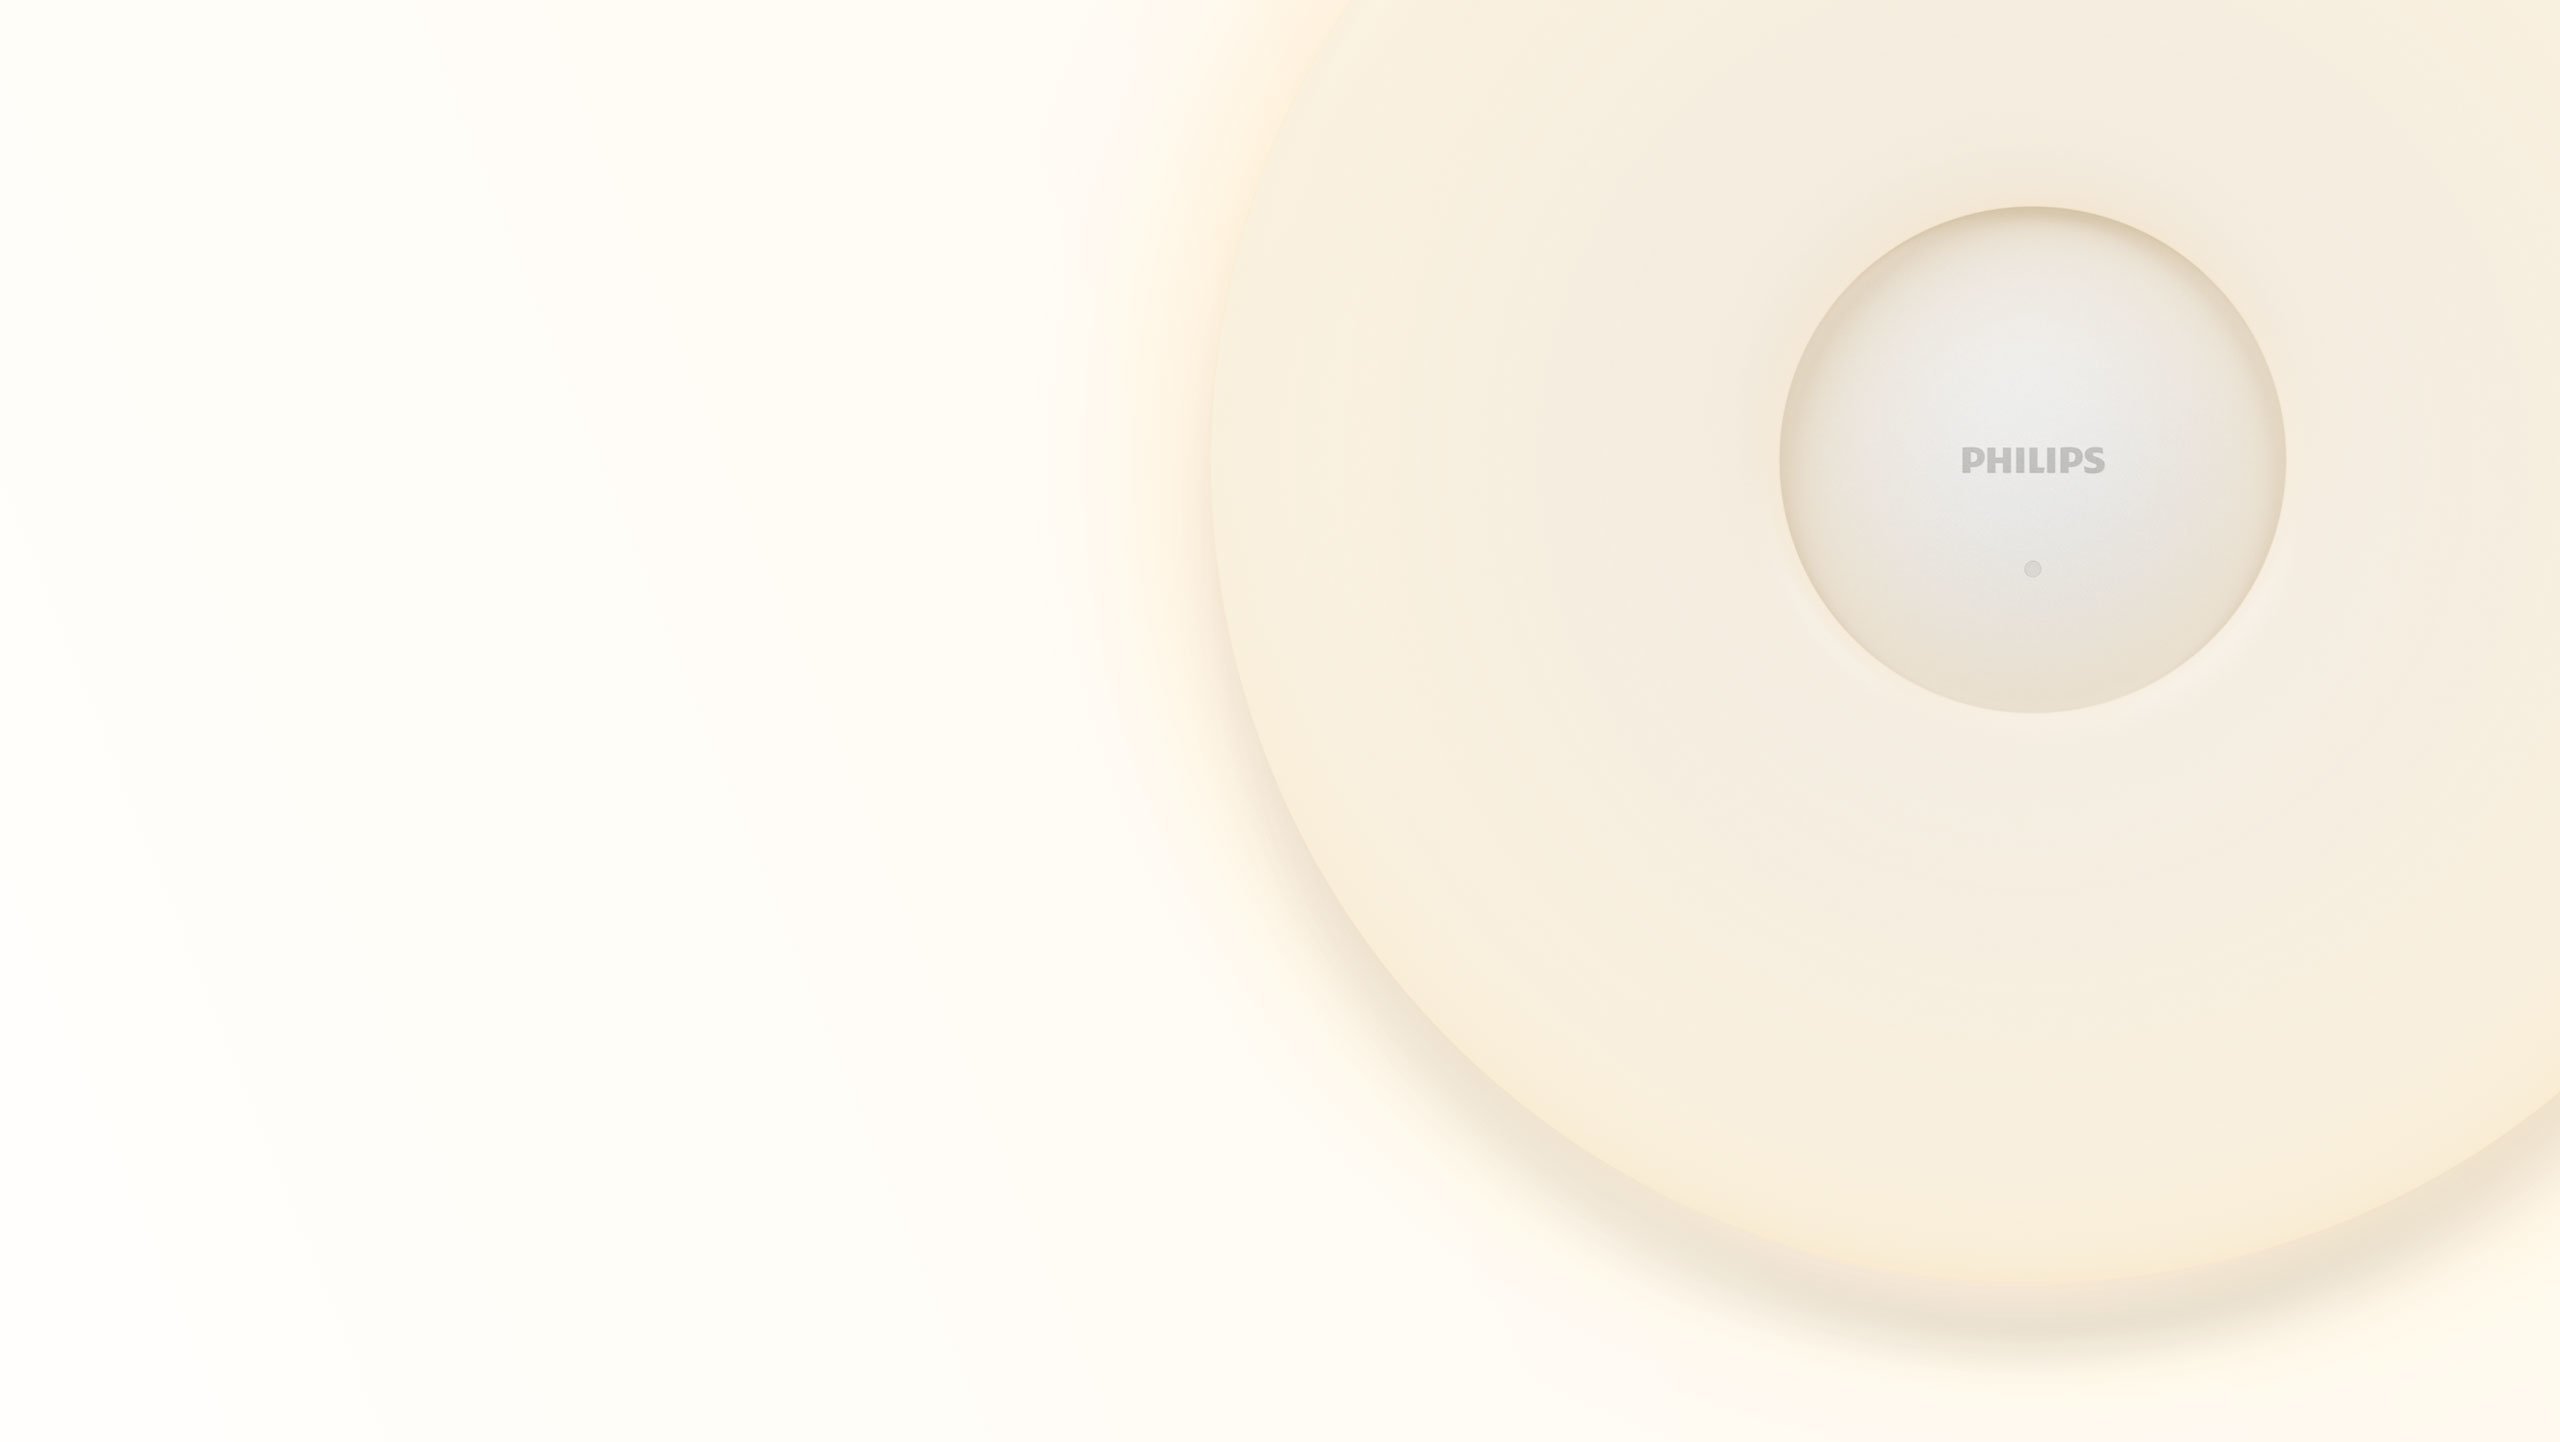 Xiaomi Philips Smart Led Ceiling Lamp